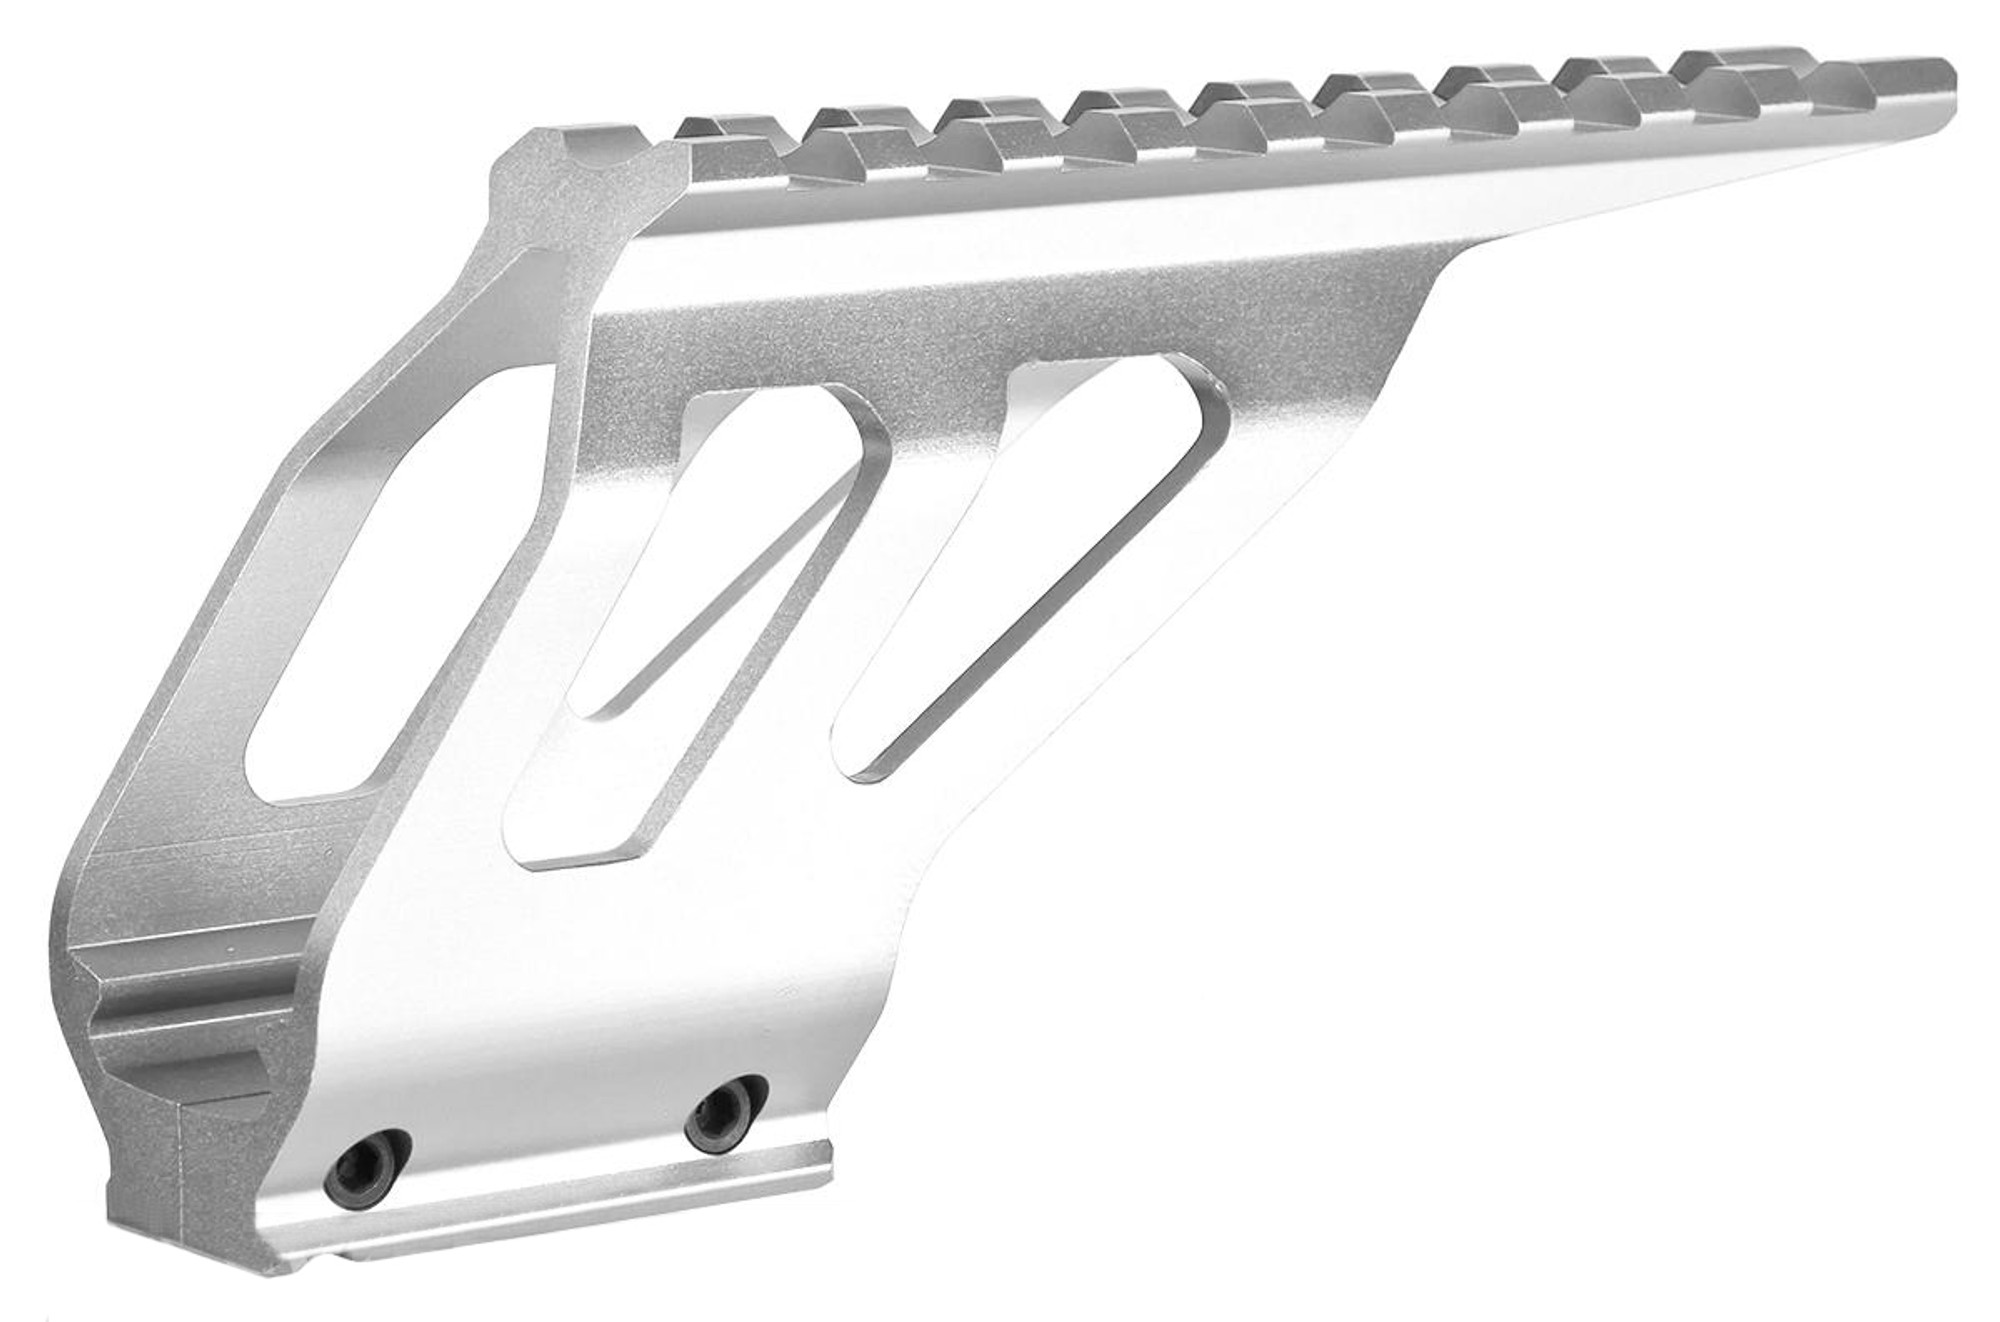 ASG CNC Machined Aluminum Rail Mount for ASG CZ SP-01 Airsoft Pistols - Silver